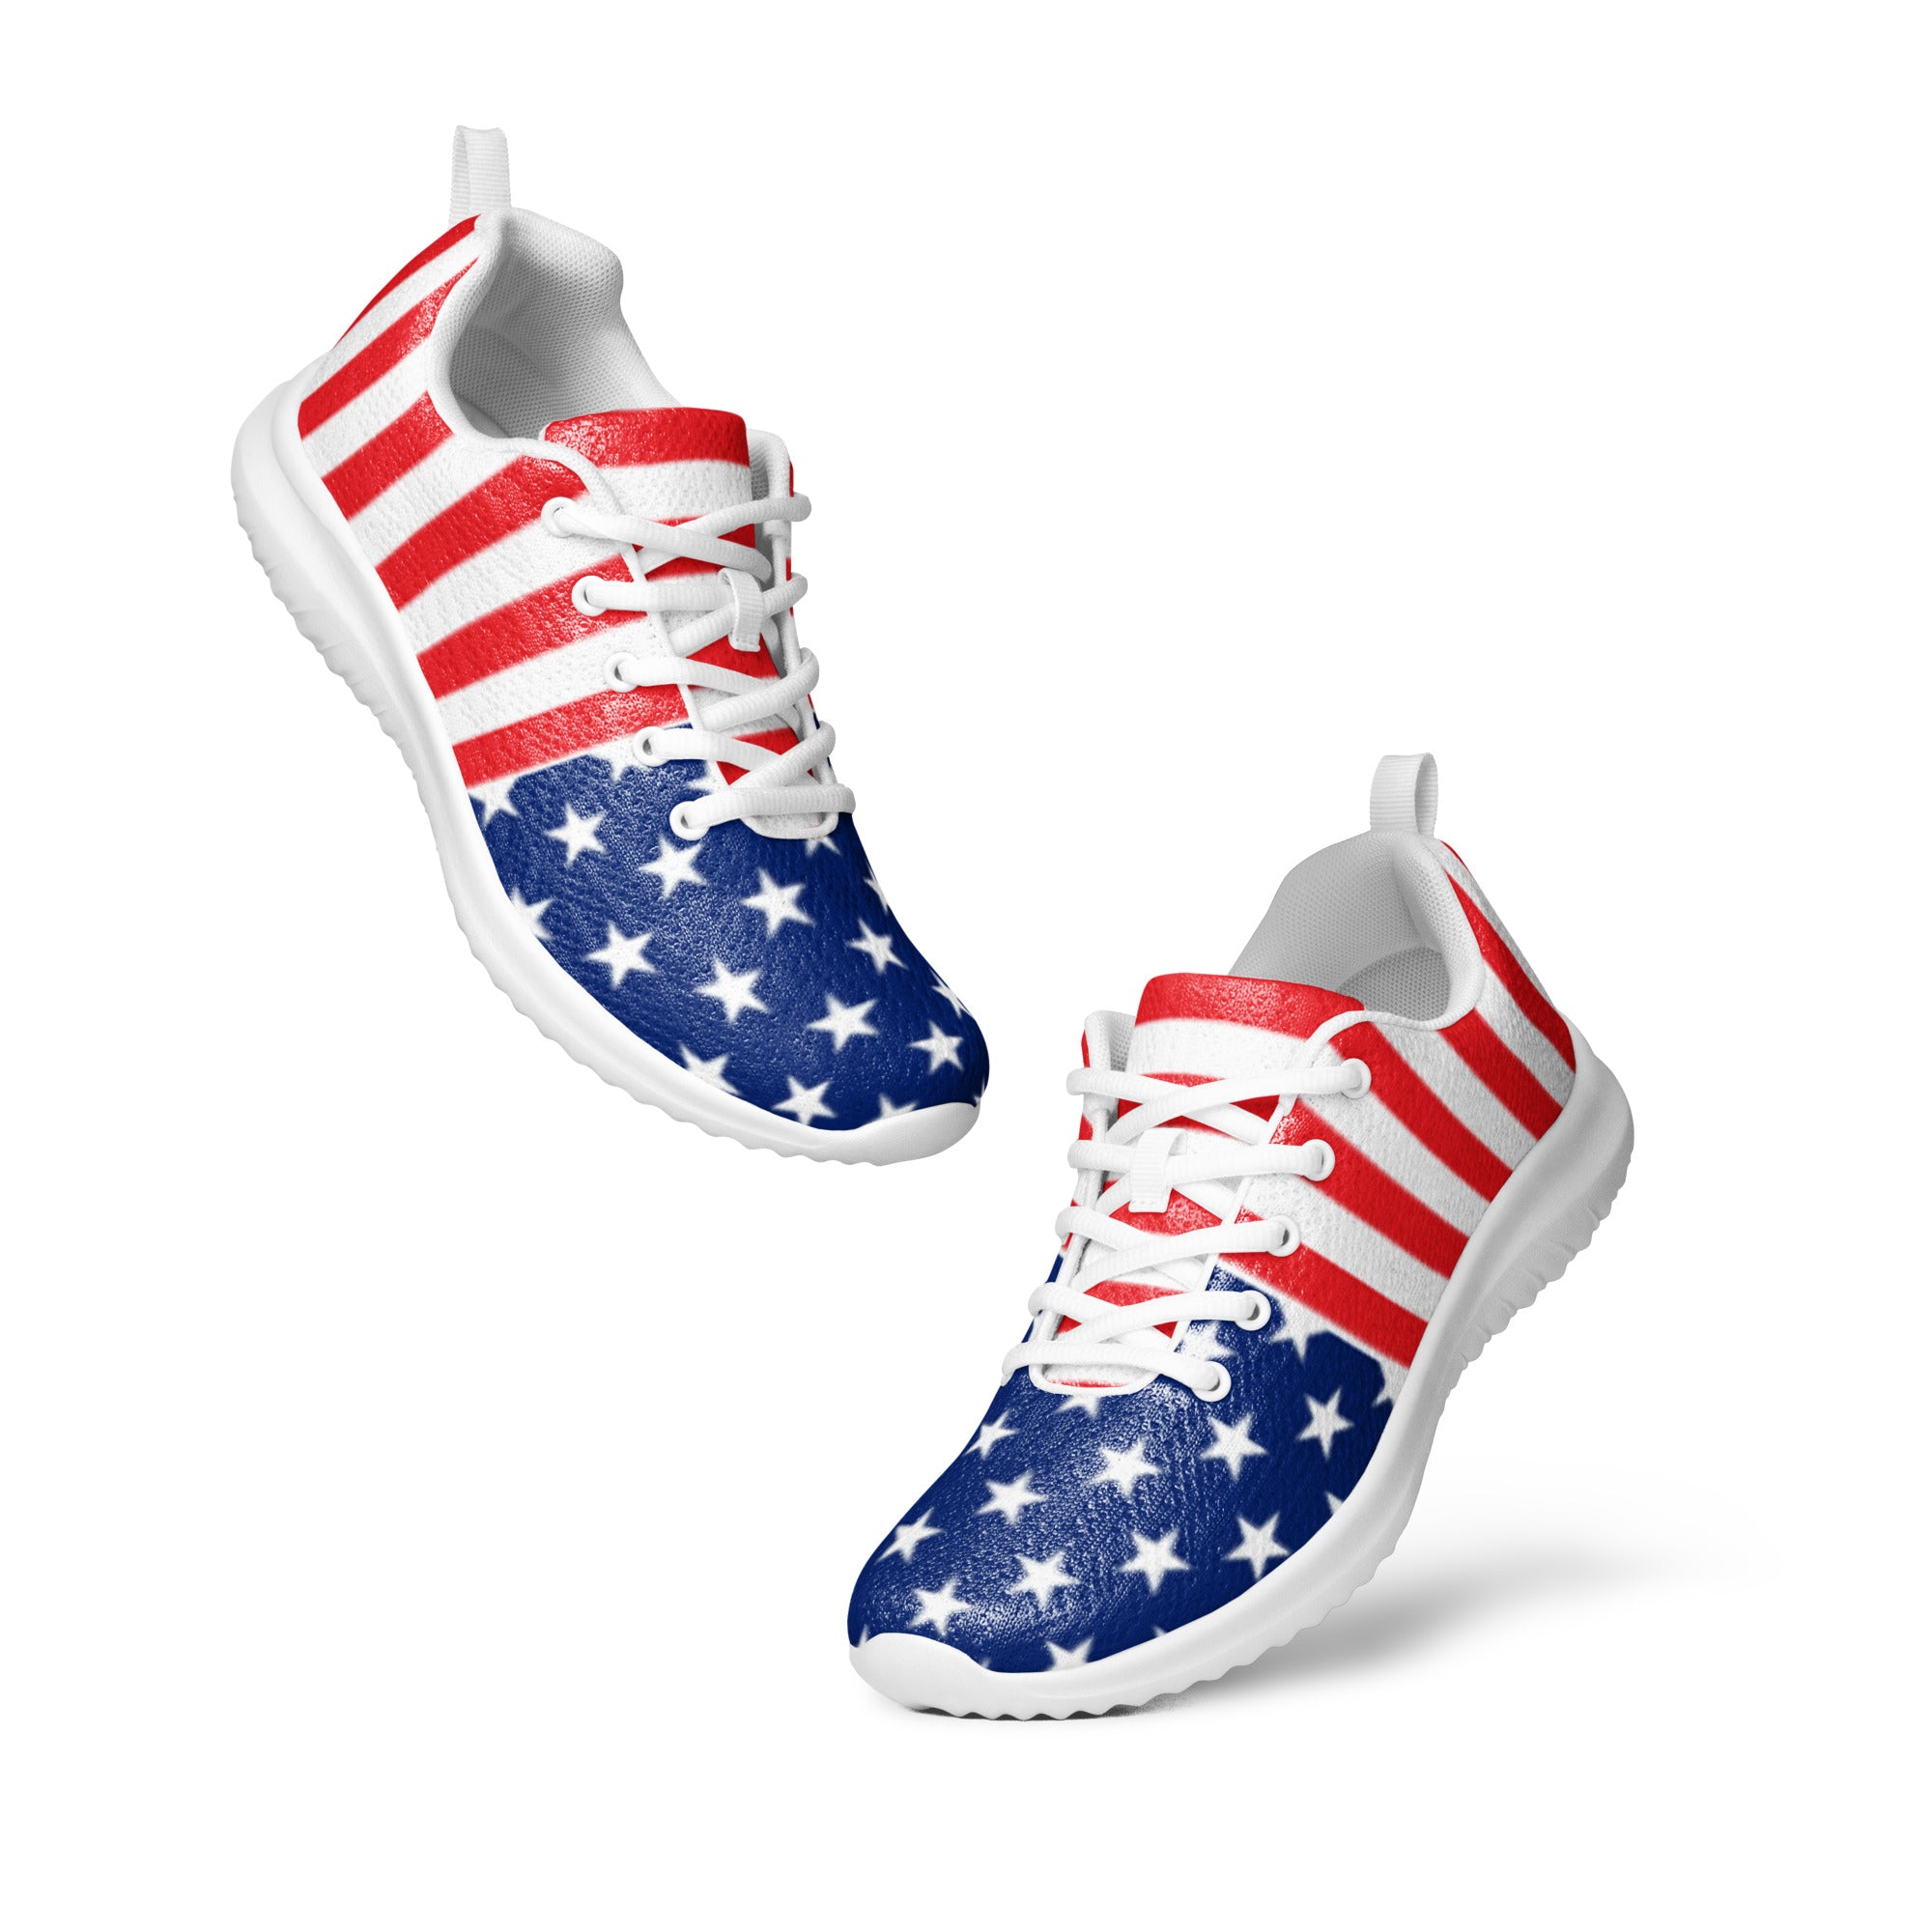 "Freedom Stride" - American flag style men's athletic shoes